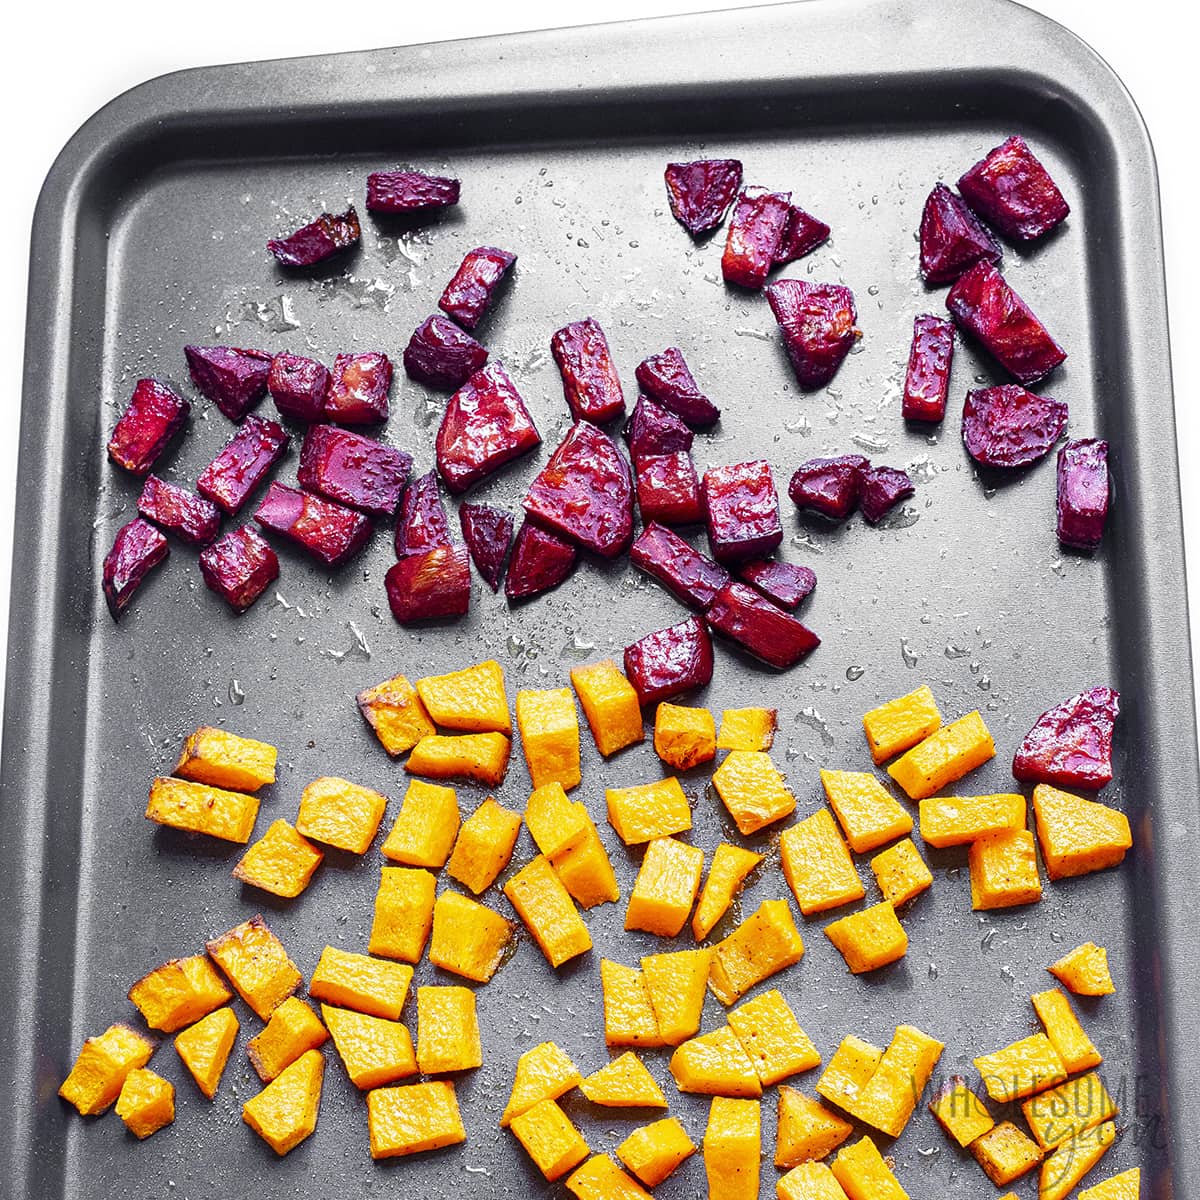 Roasted butternut squash and beets on a sheet pan.